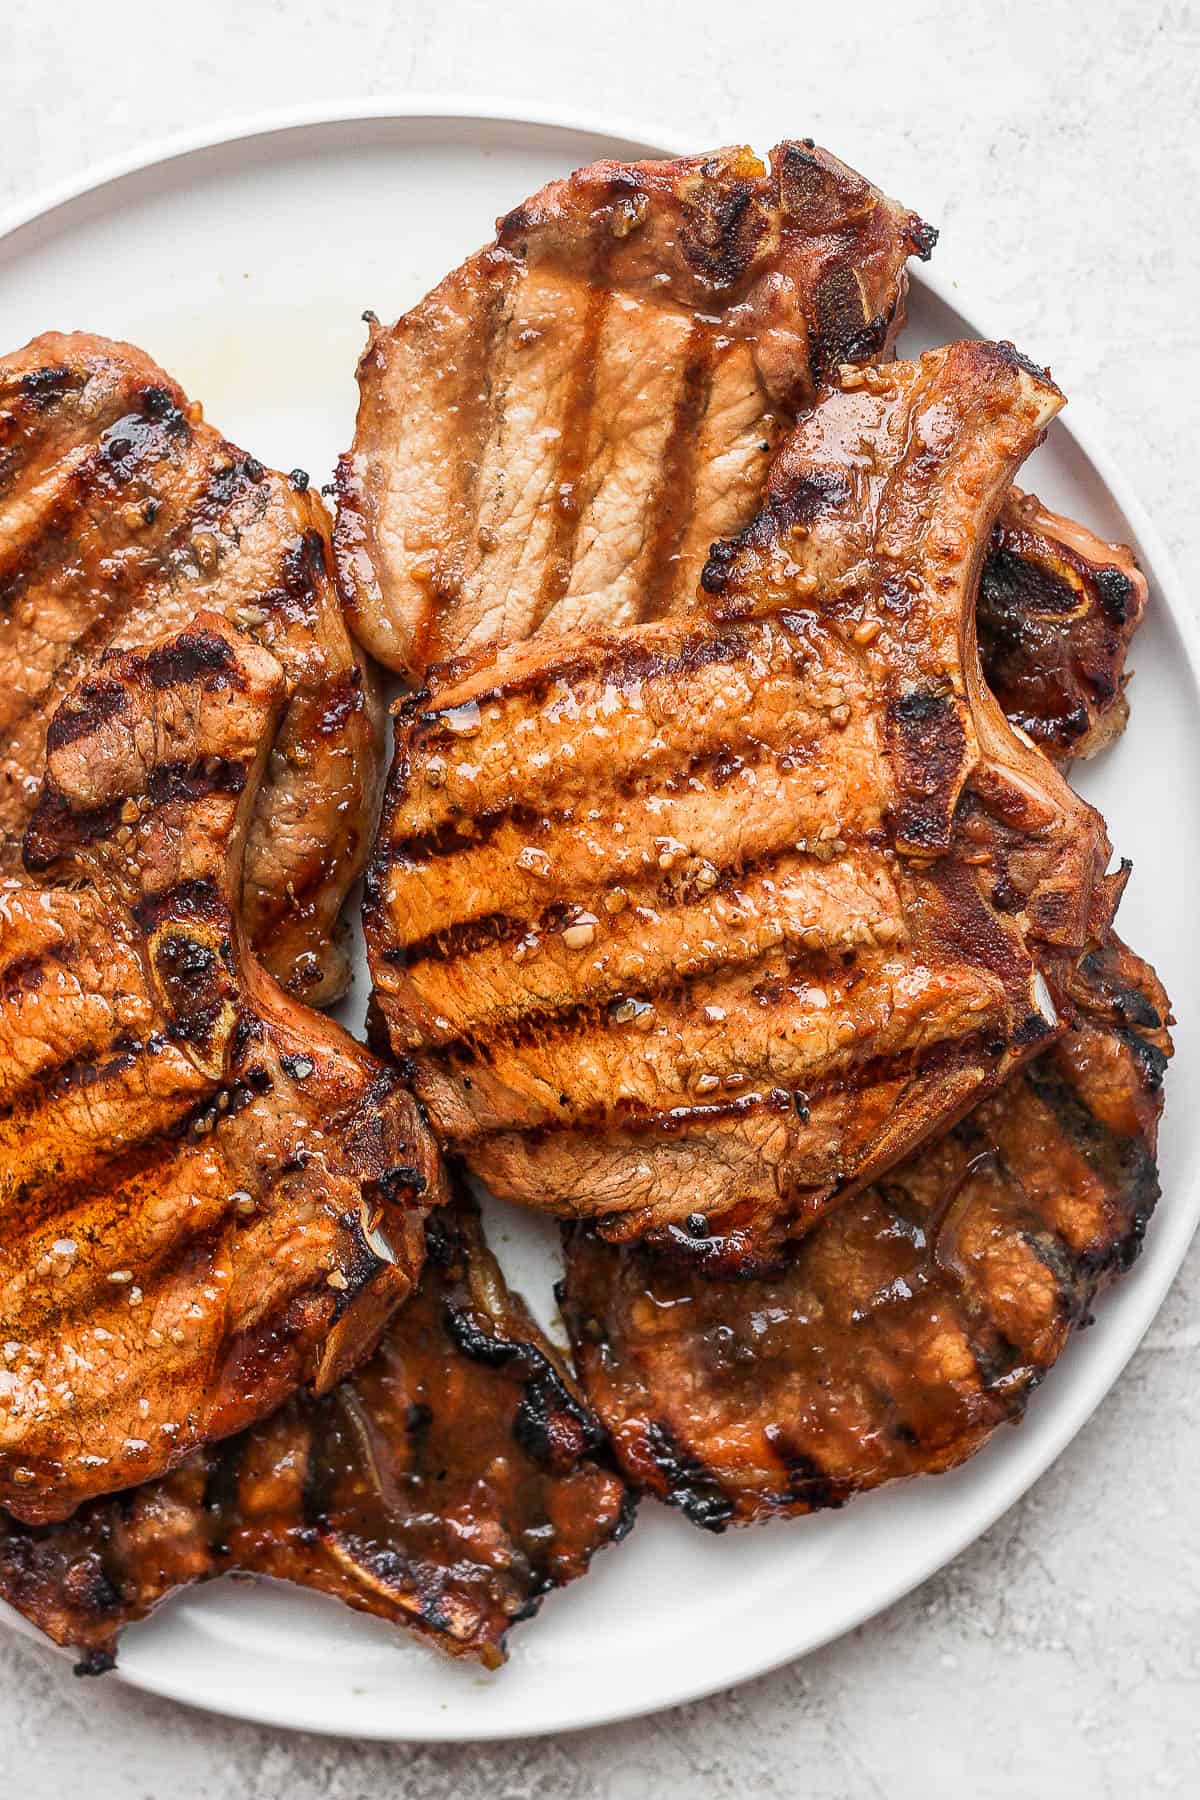 Grilled marinated pork chops on a plate.